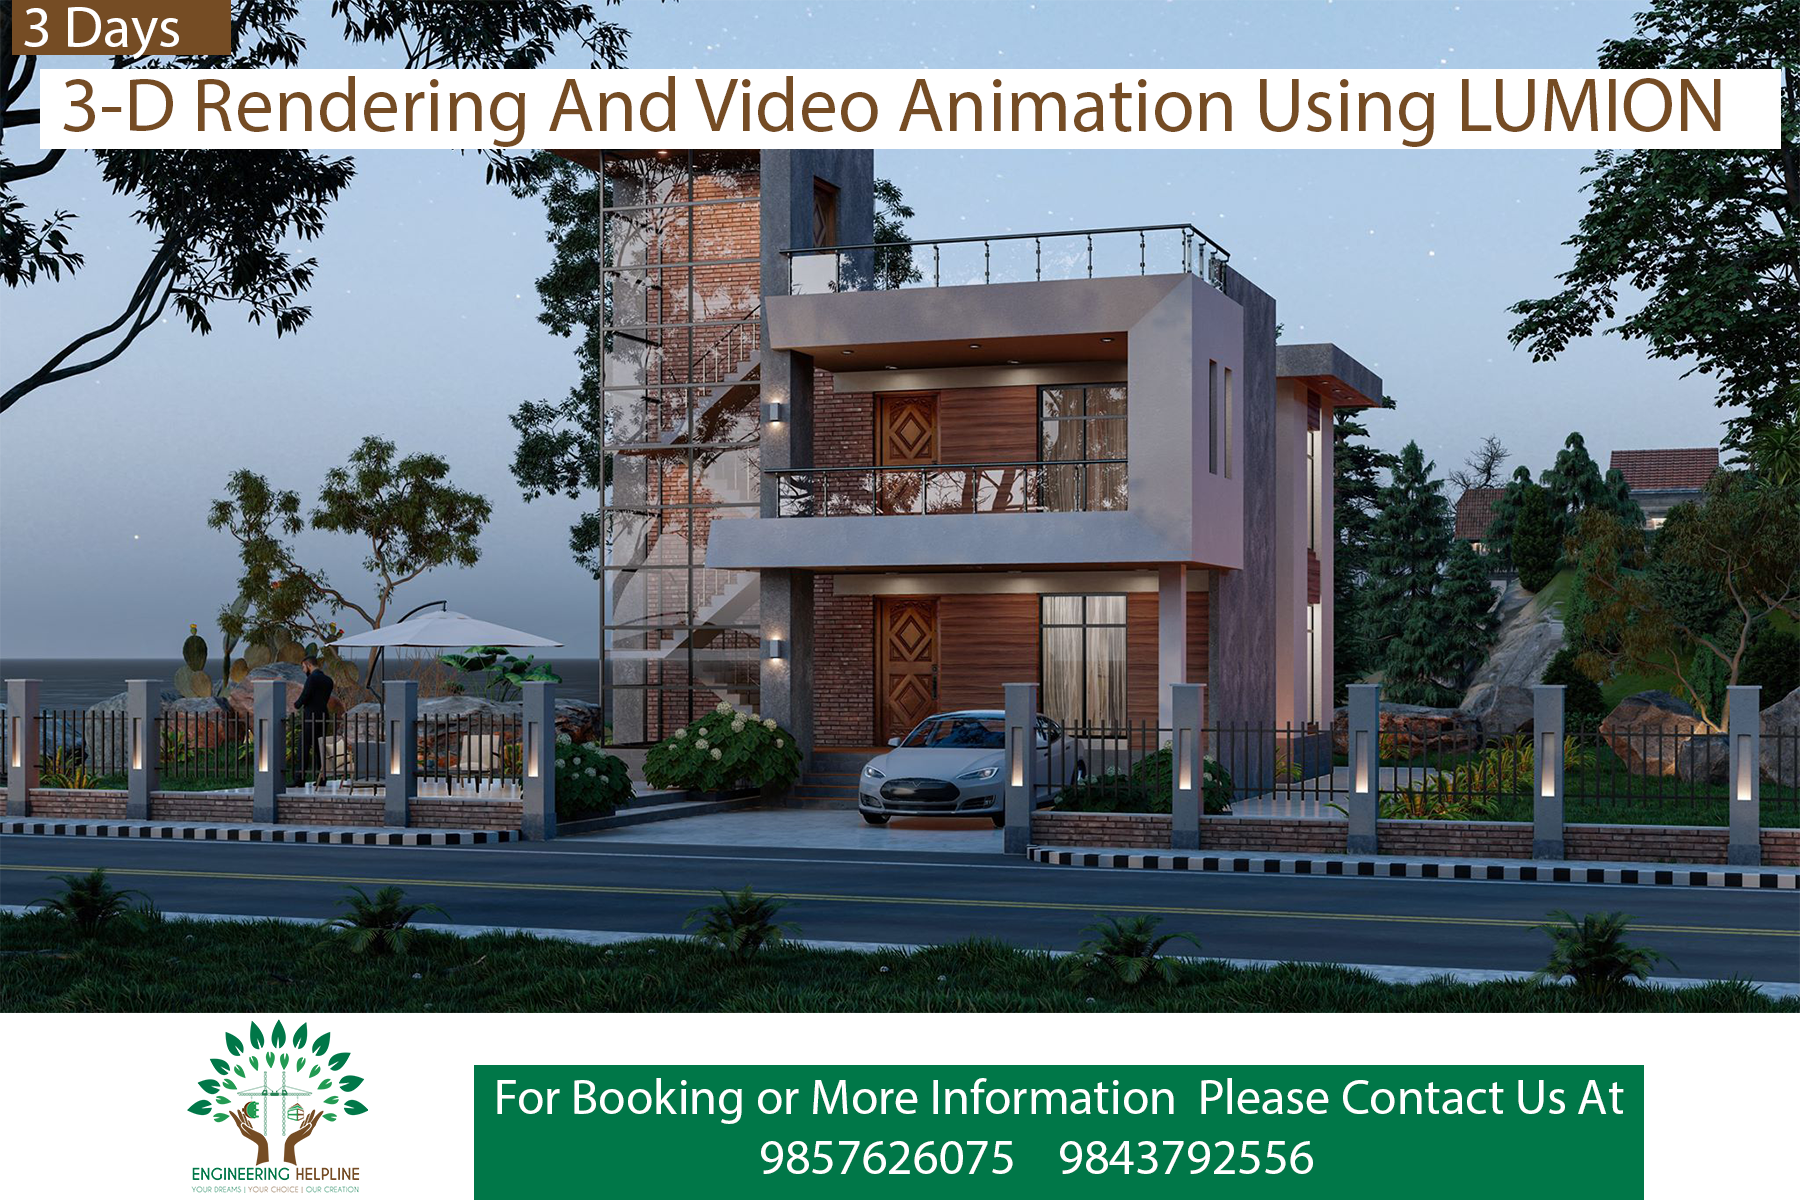 3-D Rendering And Video Animation Using LUMION